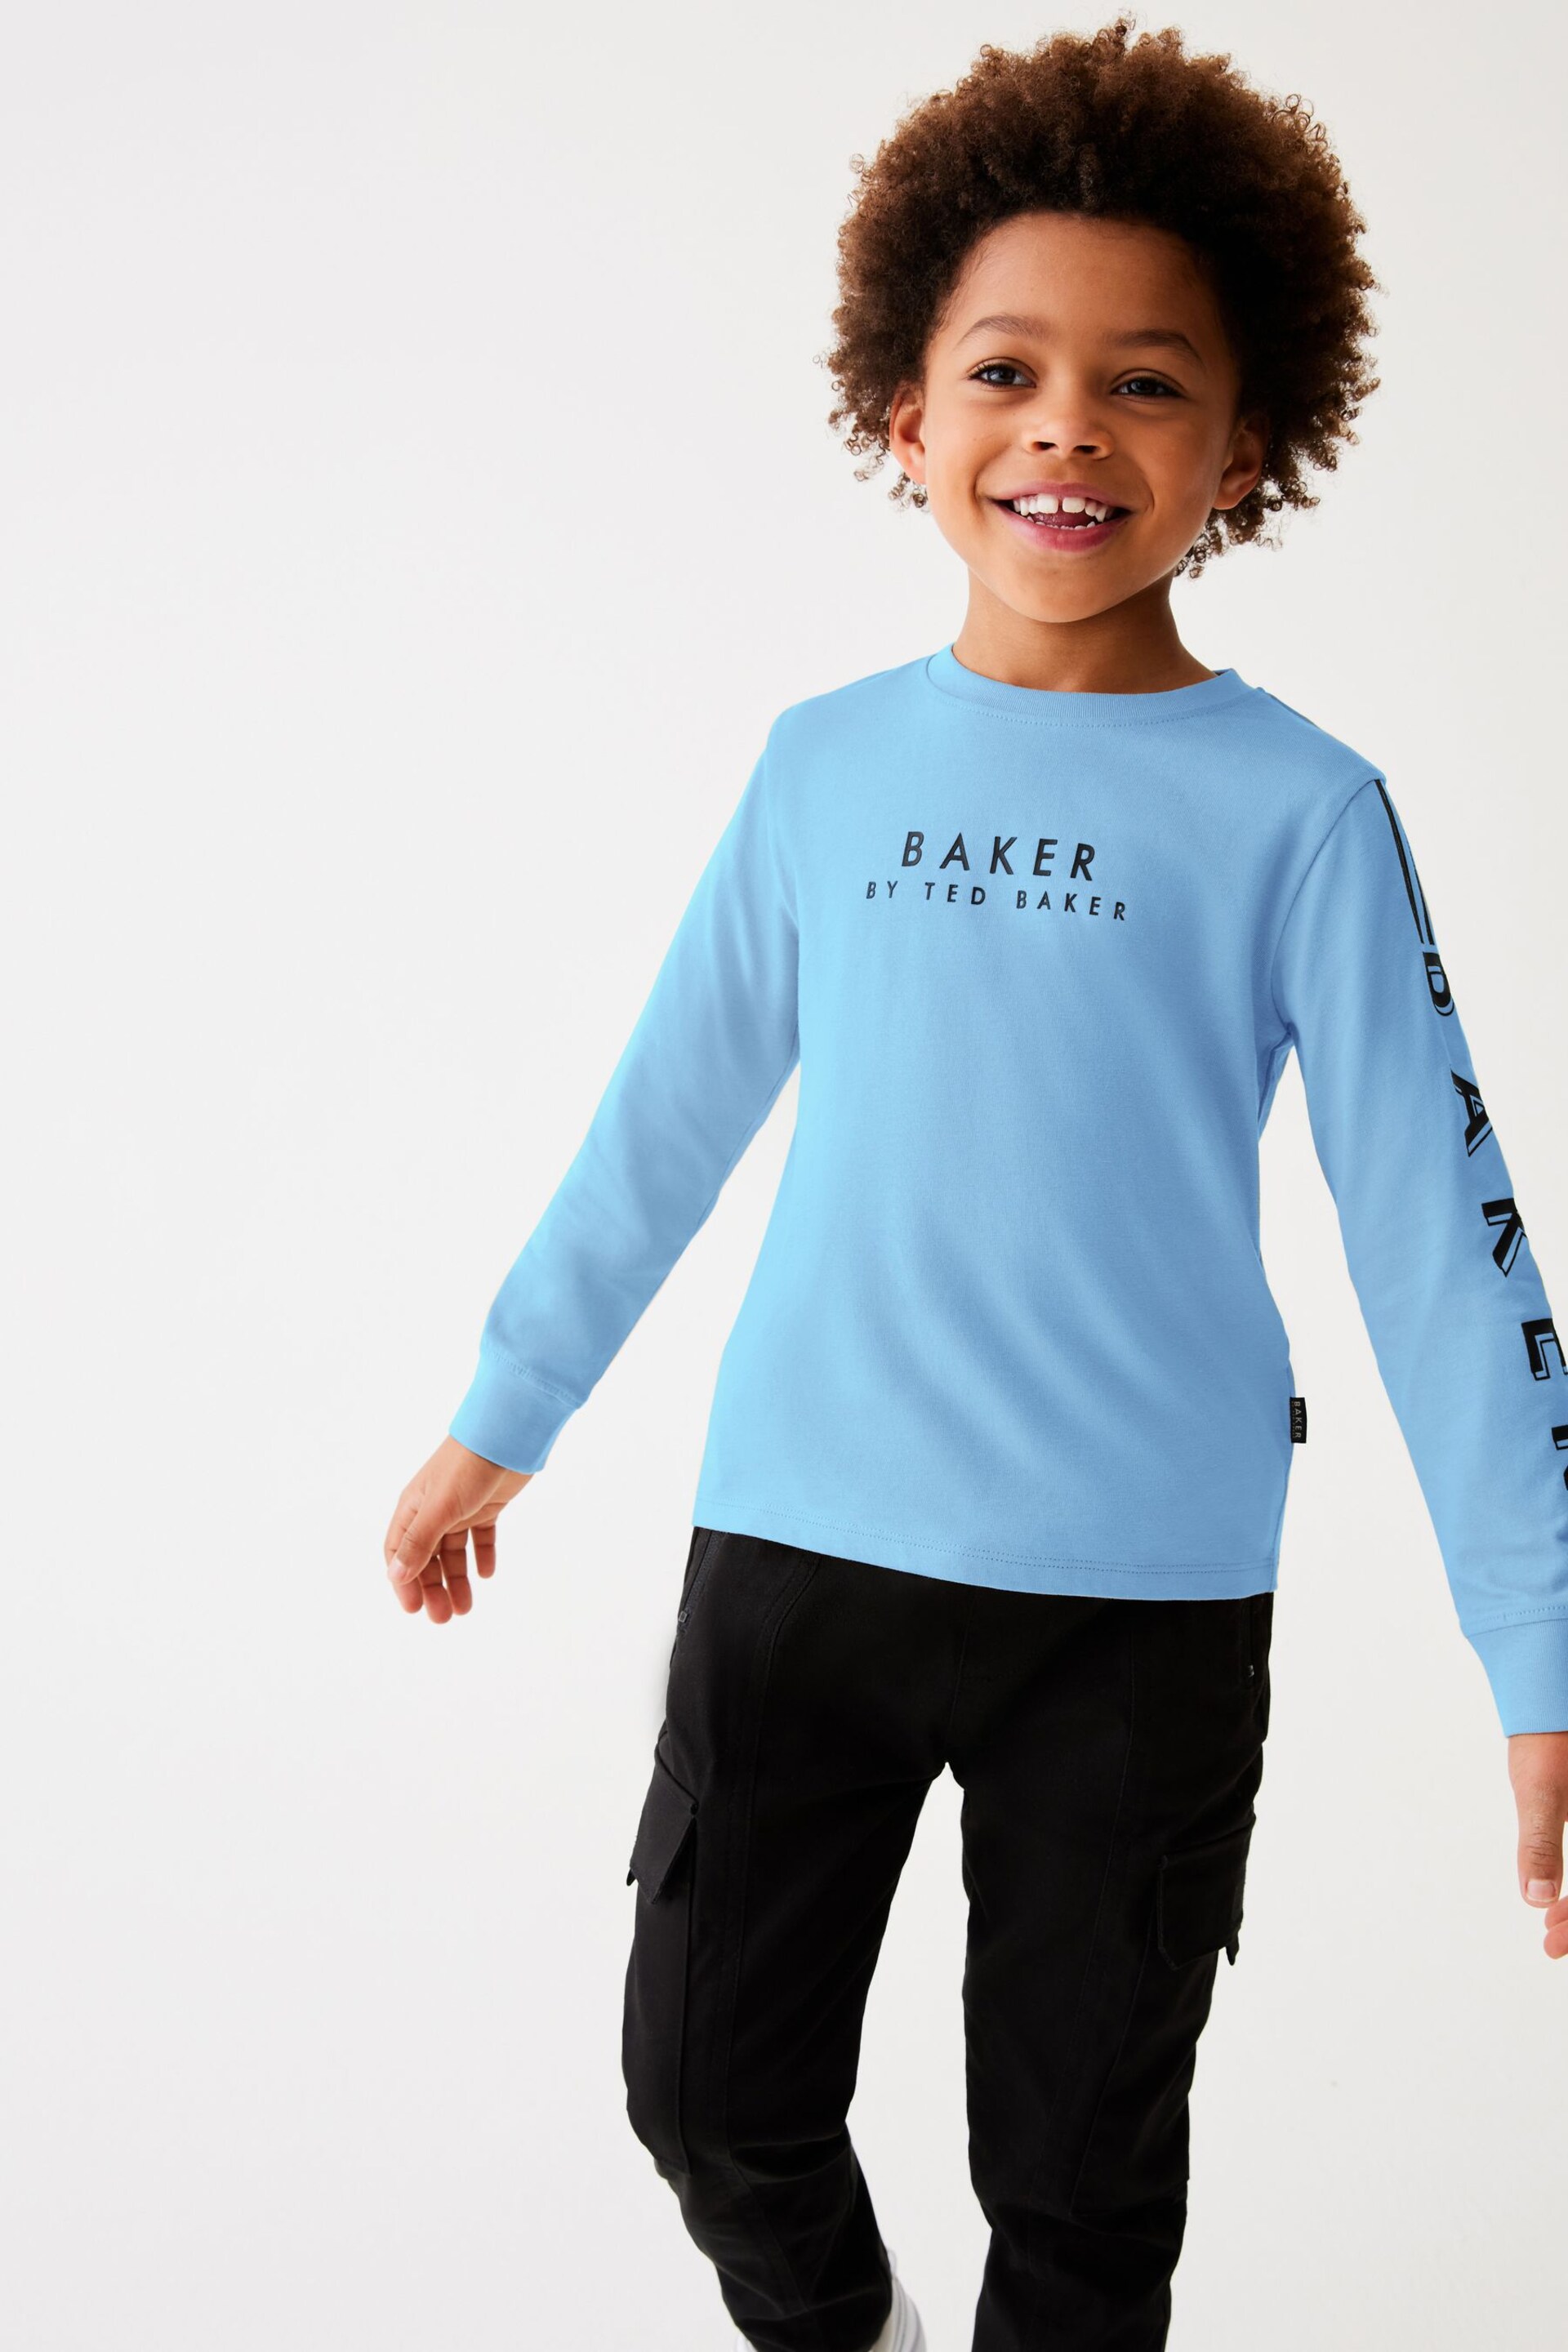 Baker by Ted Baker Long Sleeve T-Shirt - Image 4 of 14